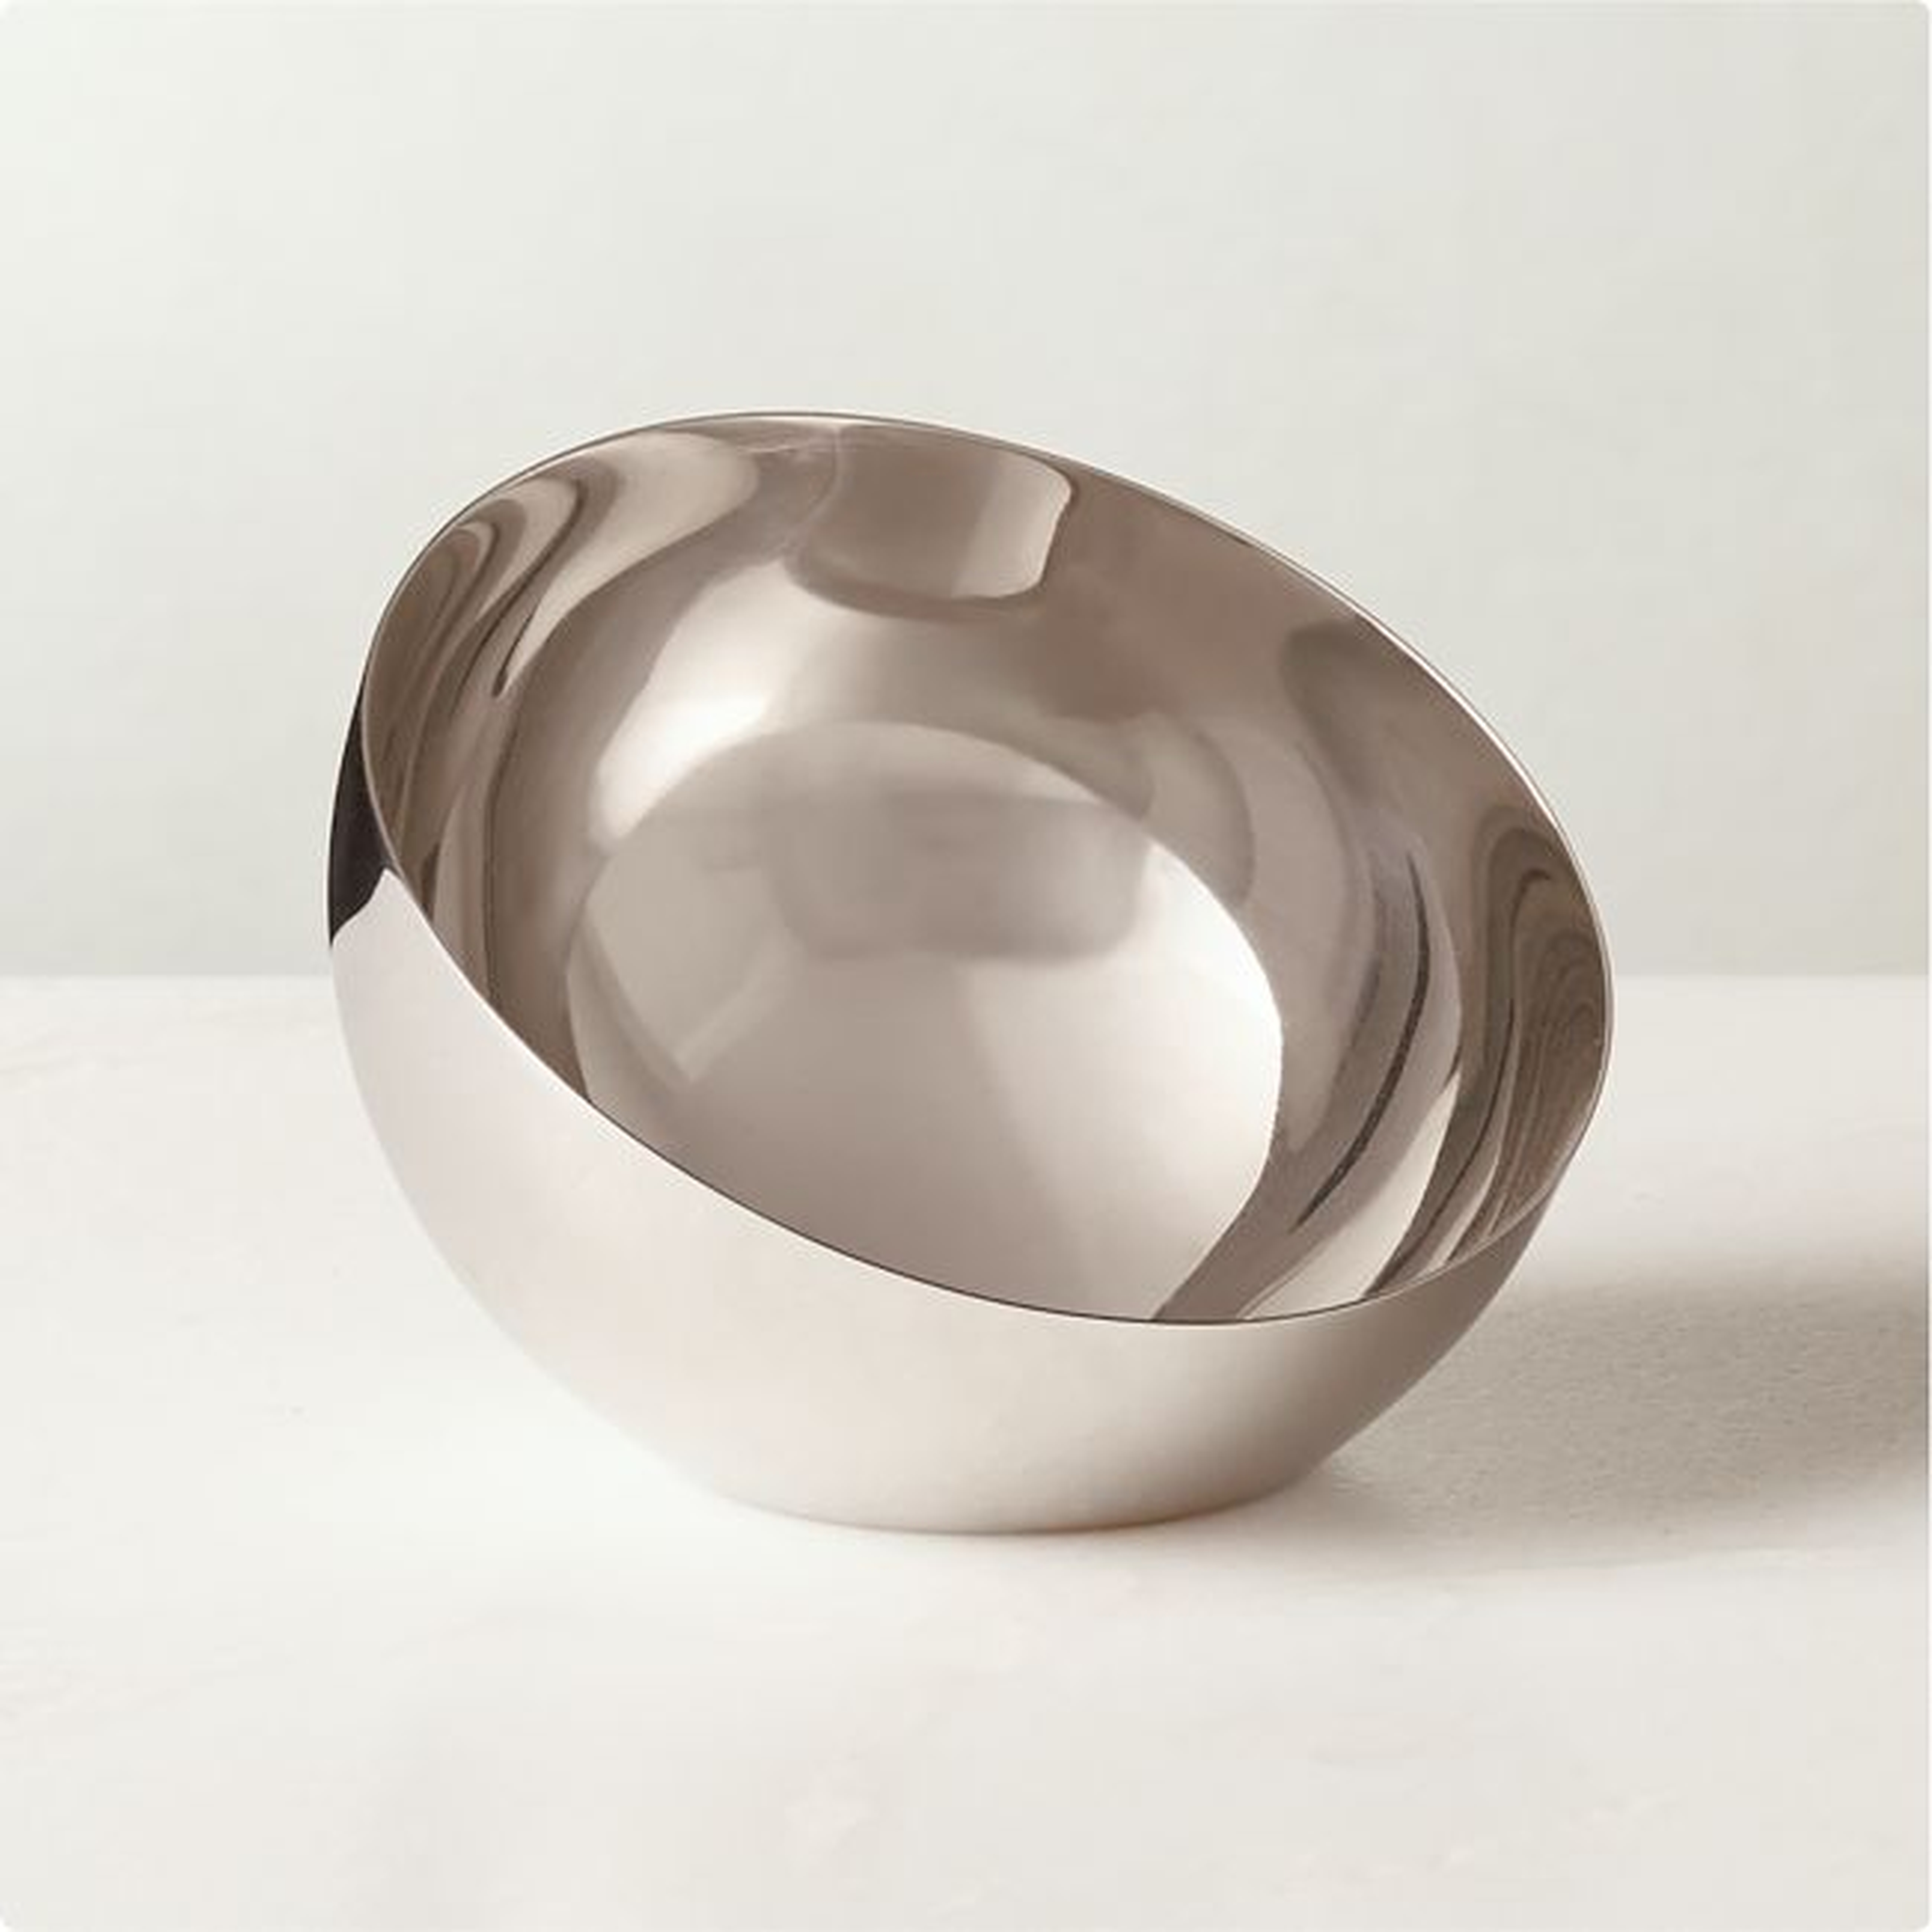 Hera Polished Stainless Steel Serving Bowl Small - CB2